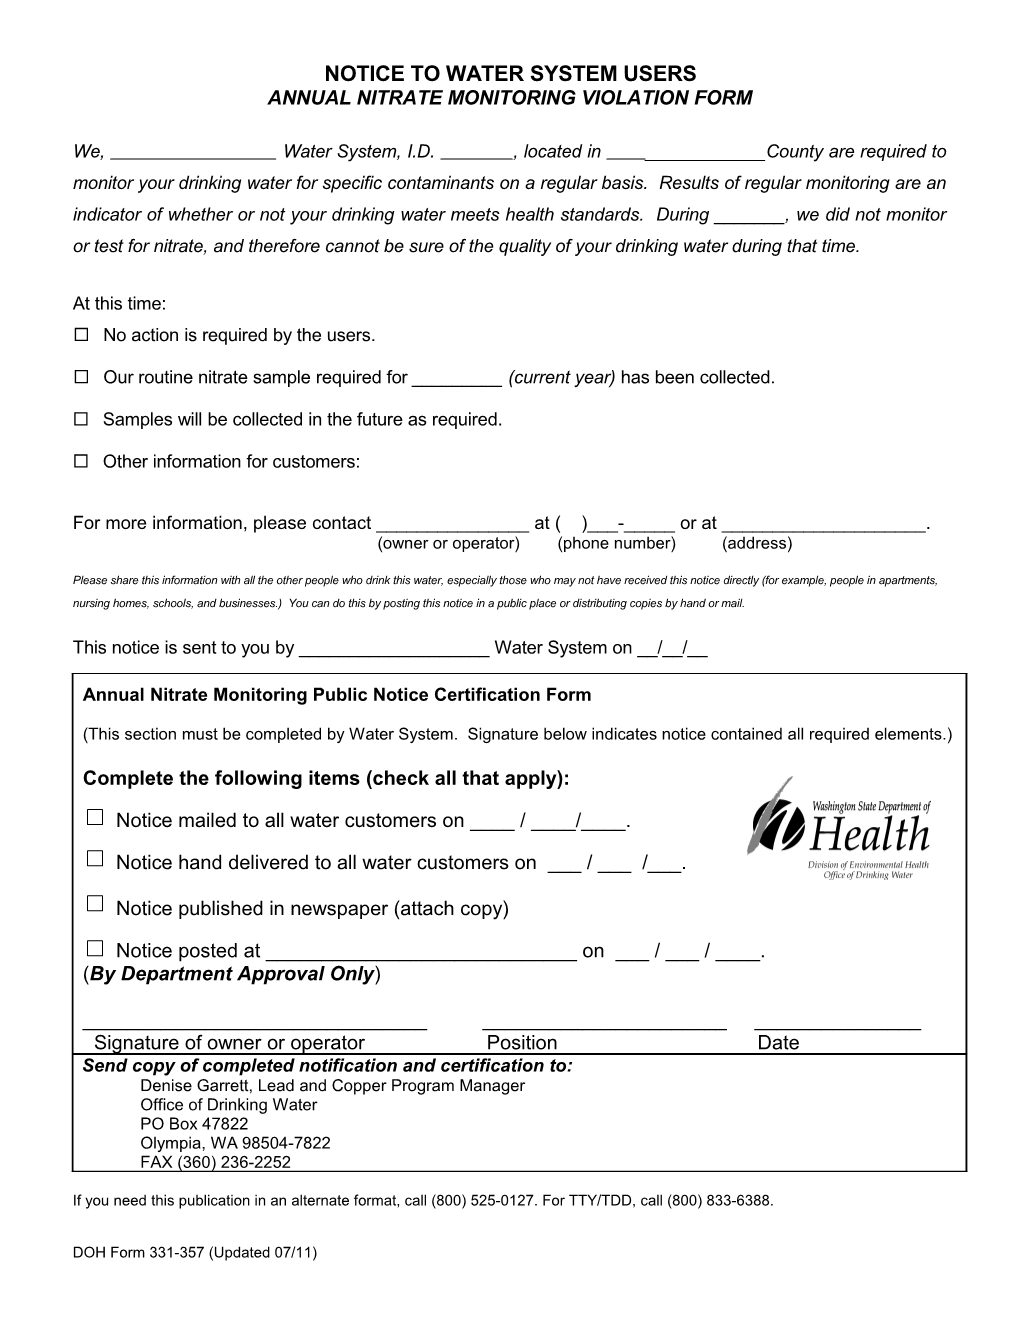 Annual Nitrate Monitoring Public Notice Certification Form